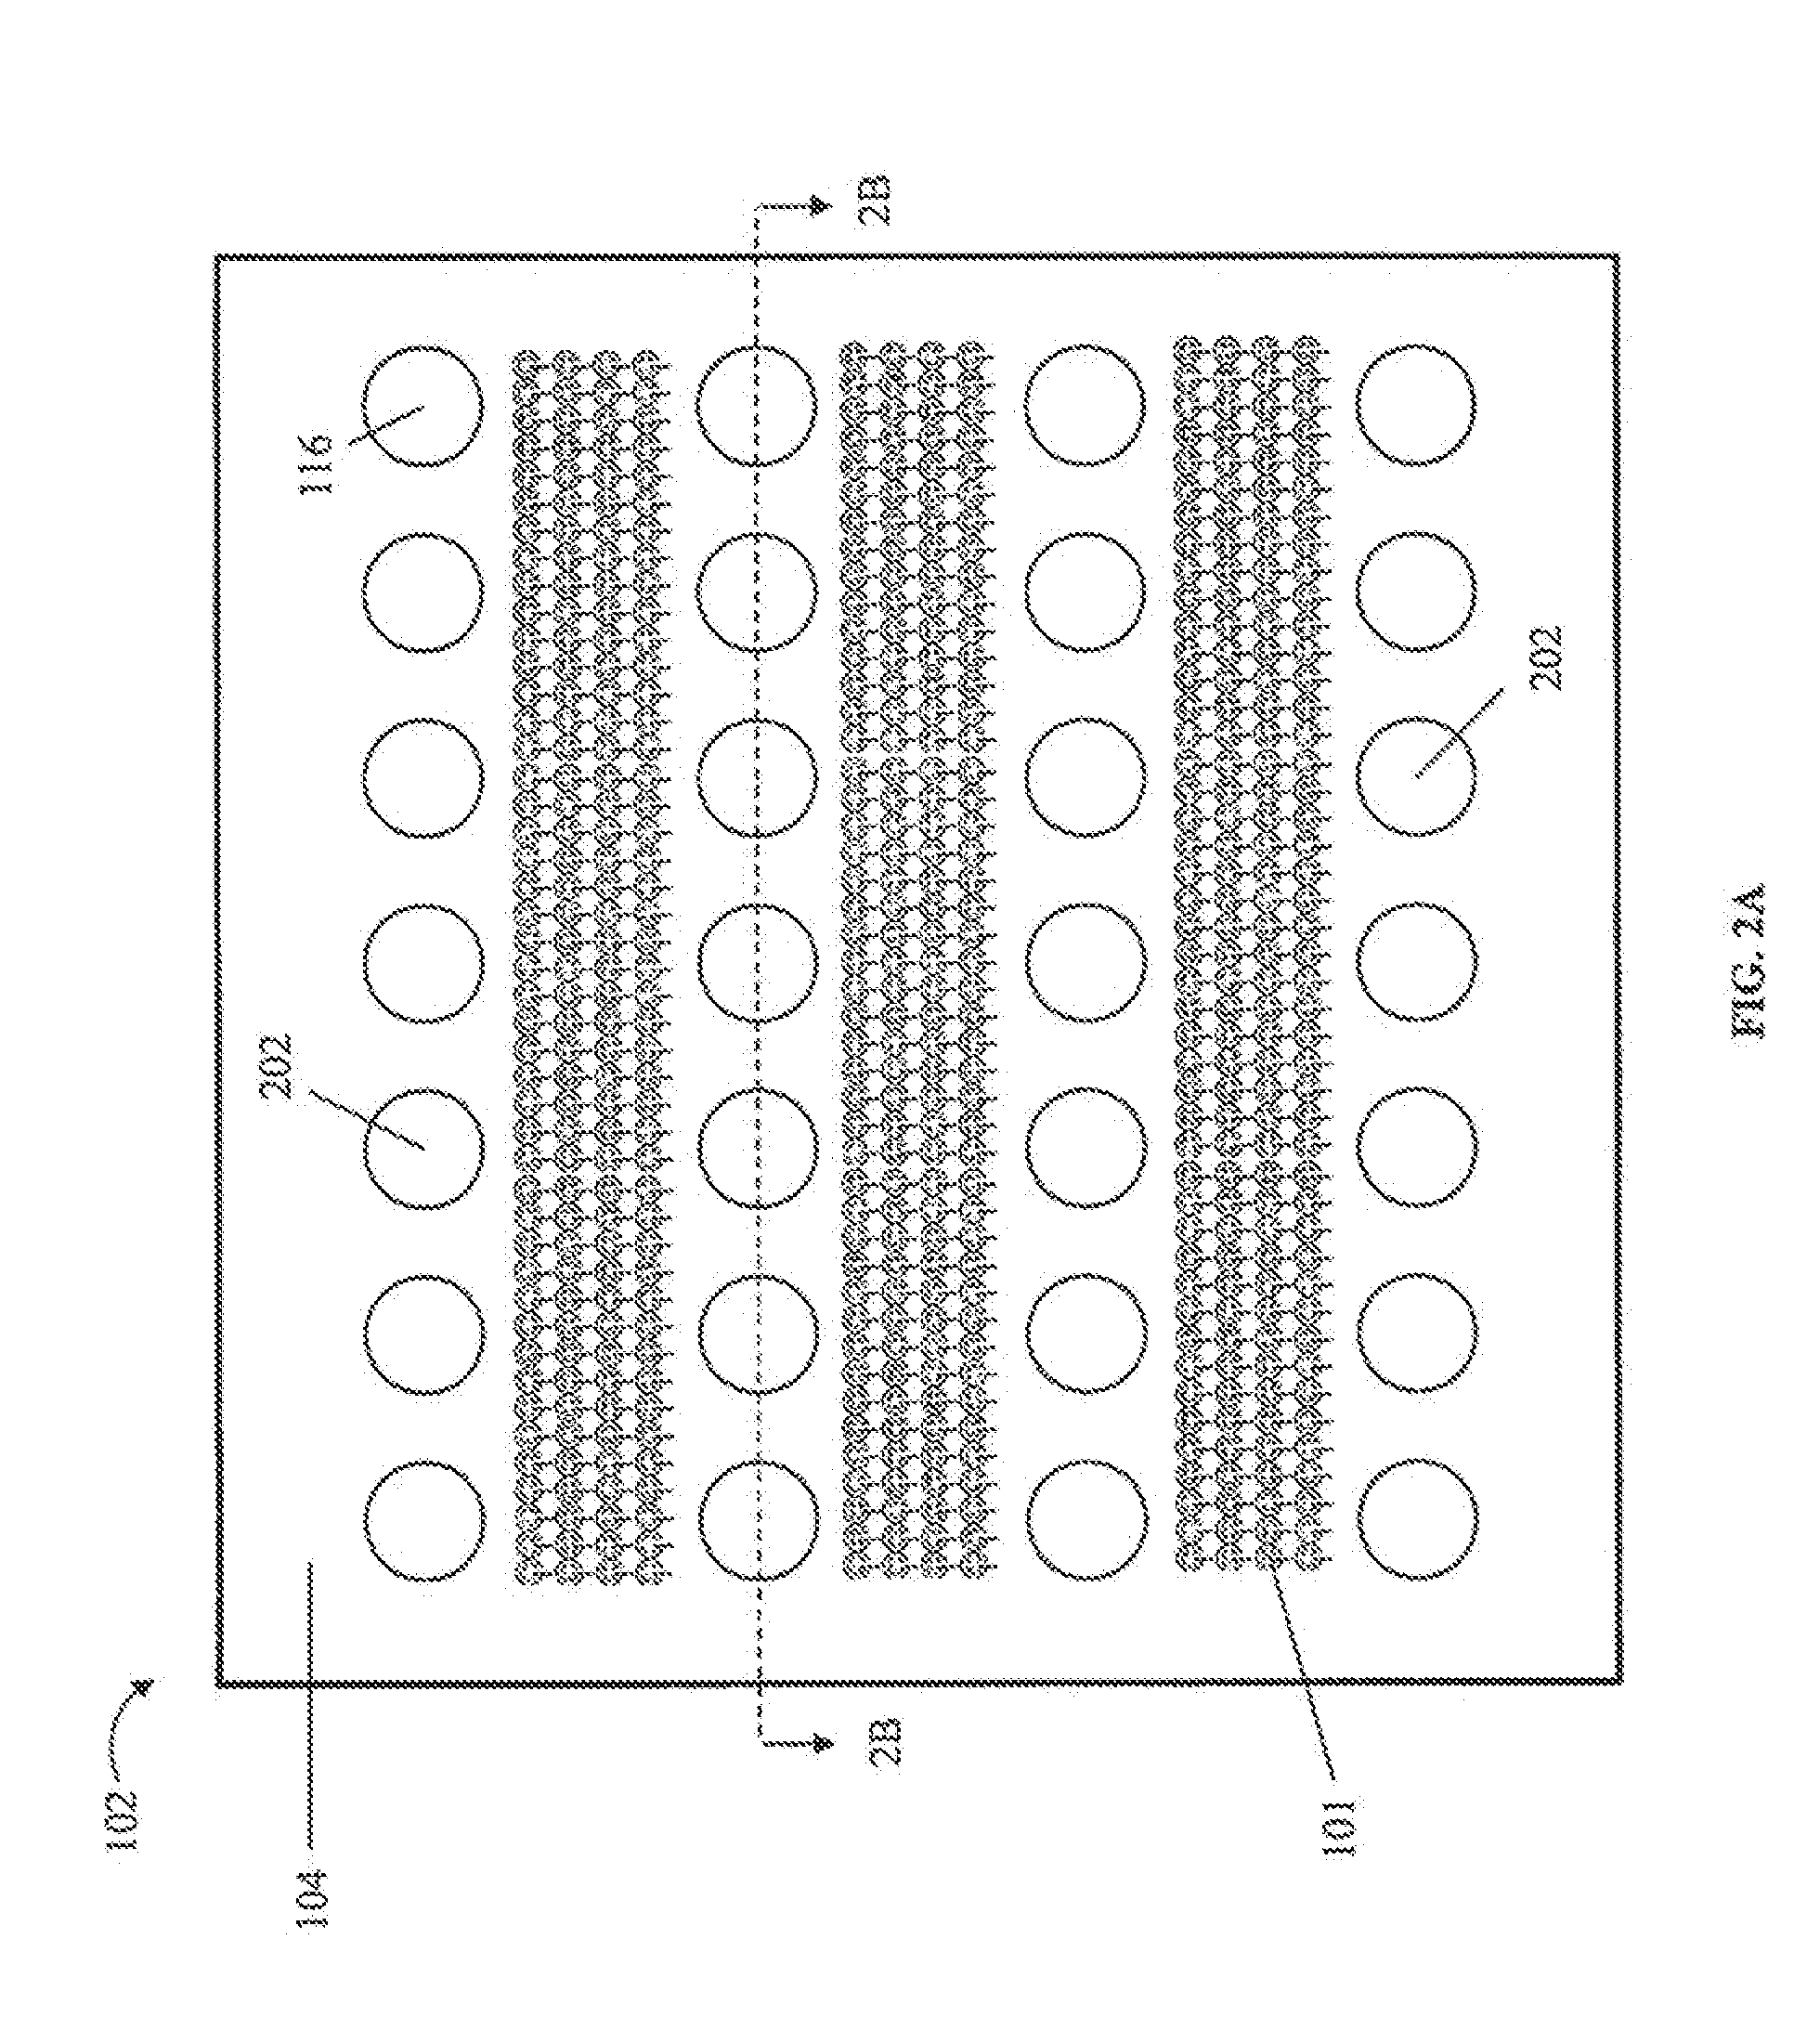 Surface Cleaning Method and Apparatus Using Surface Acoustic Wave Devices